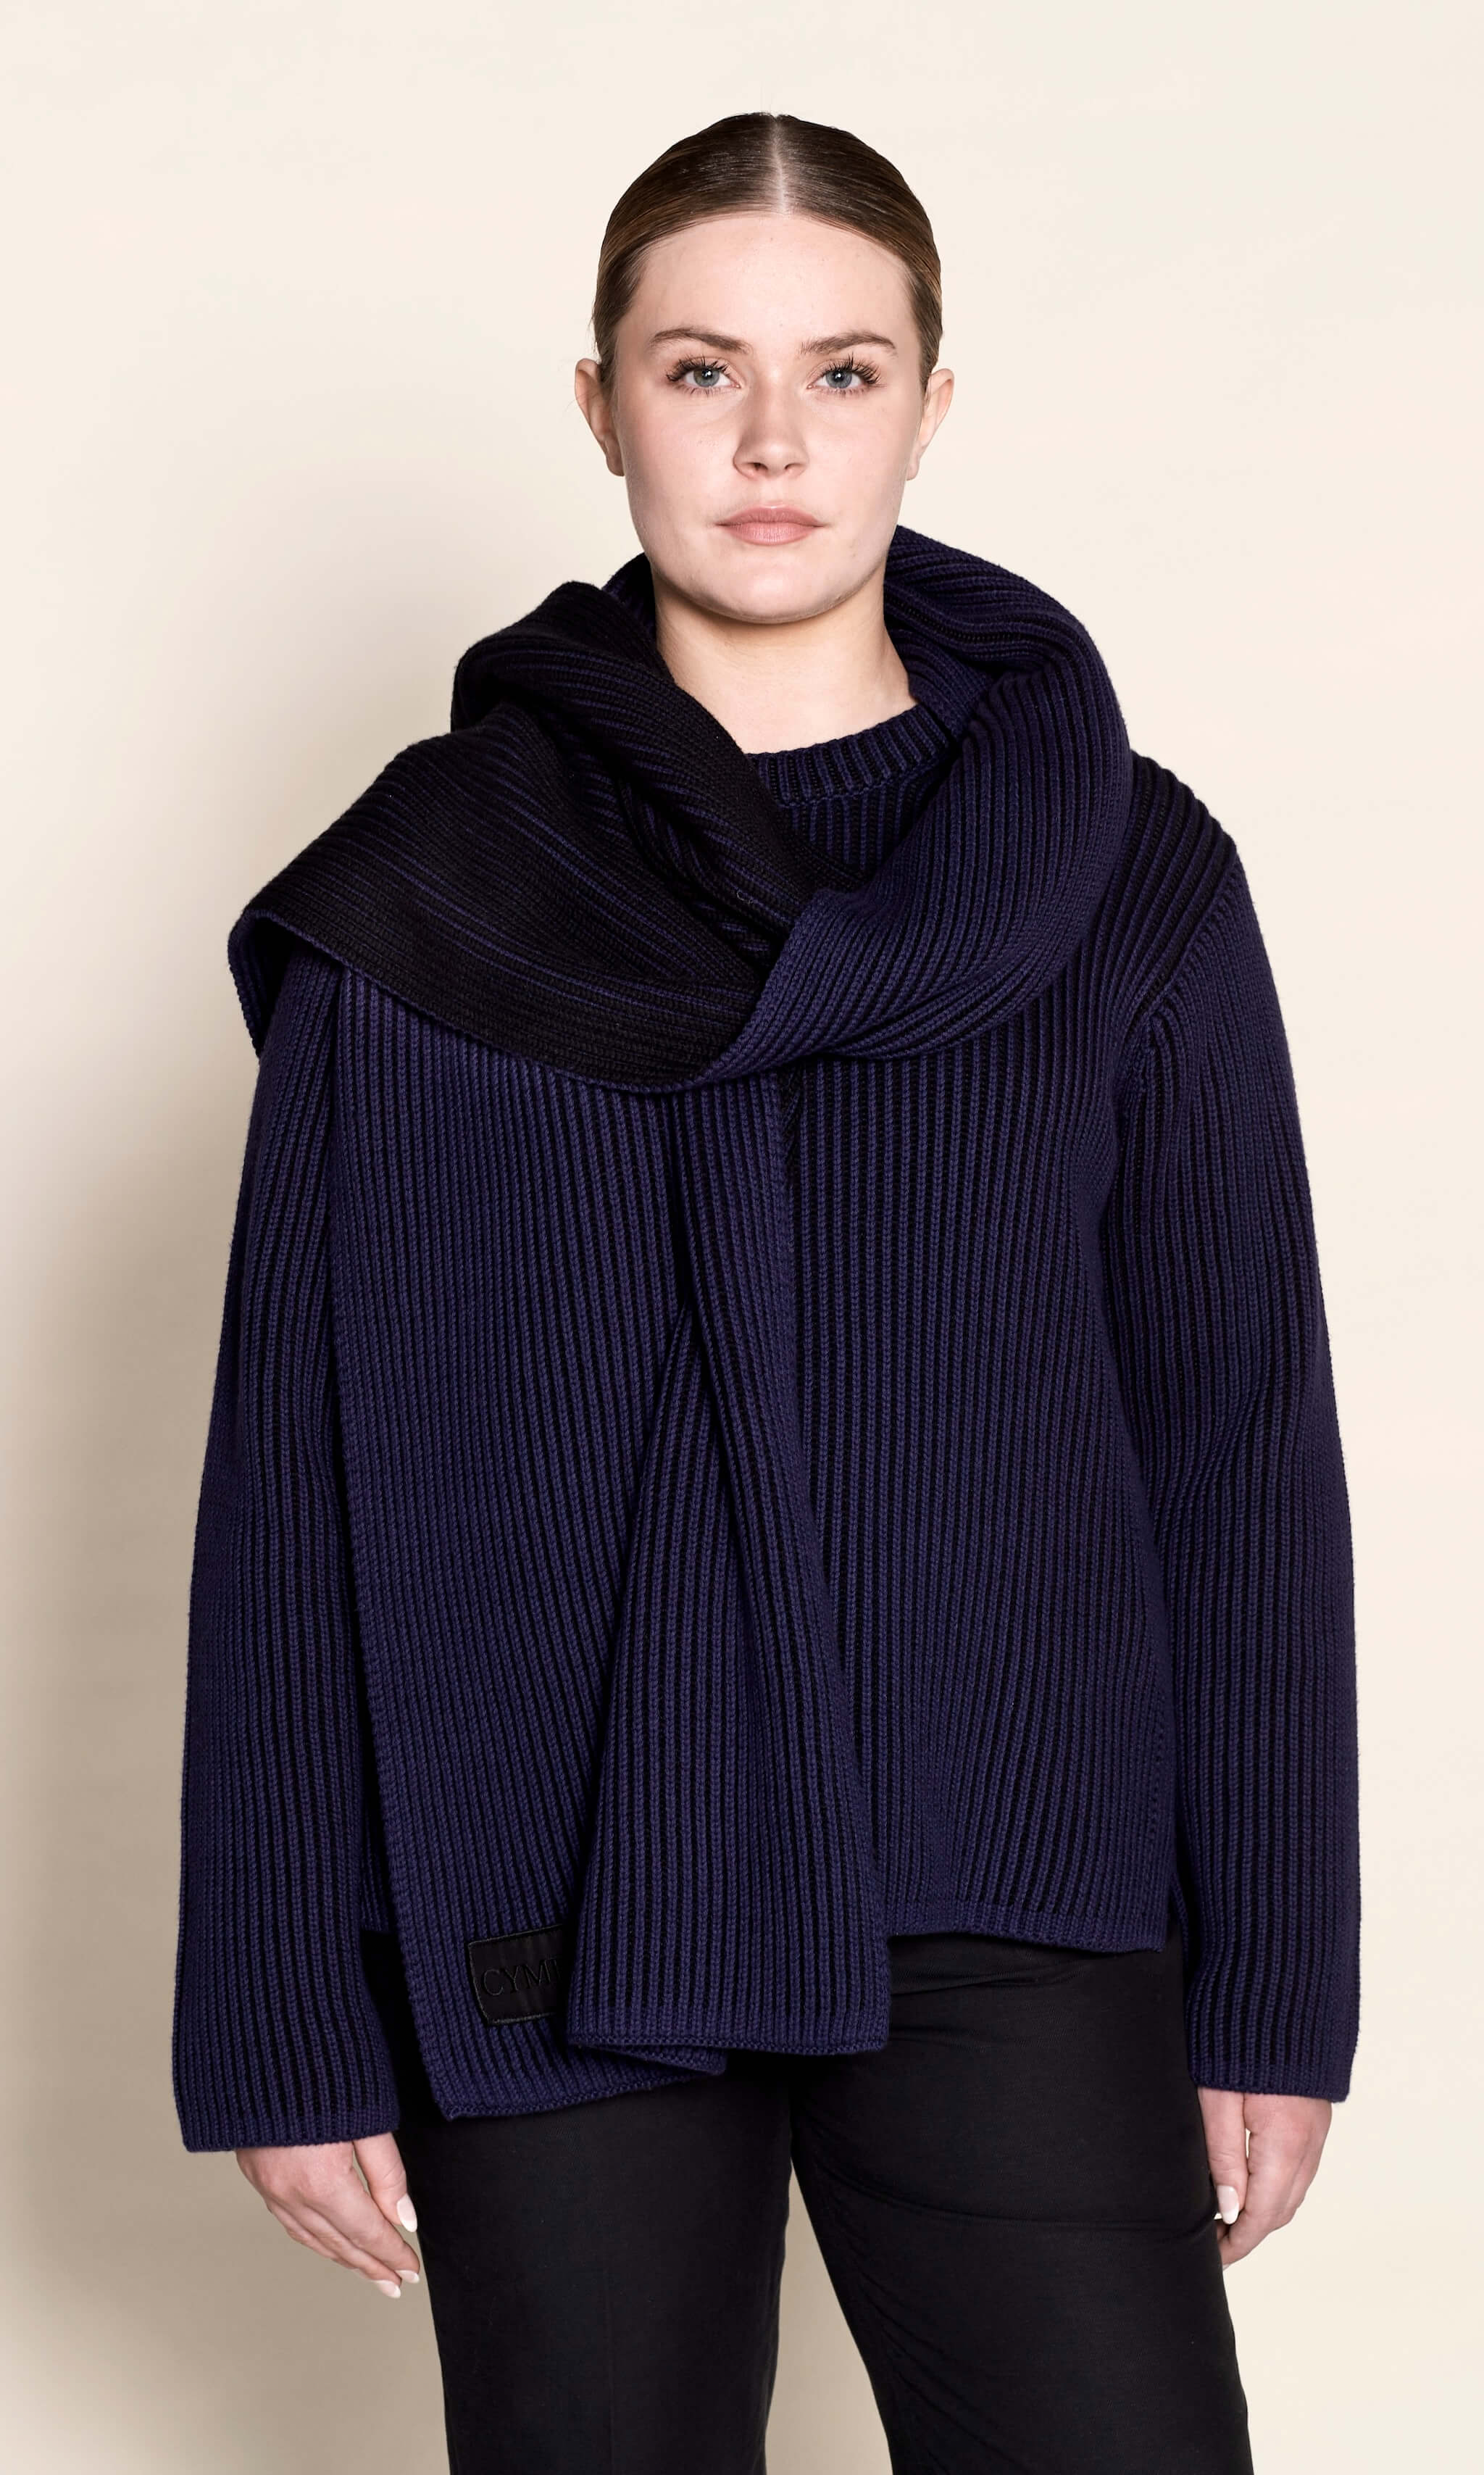 Model draped in Cyme Copenhagen's navy ribbed knit scarf paired with a matching sweater, showcasing the luxurious, sustainable materials used by the Danish fashion brand in their women's clothing line.